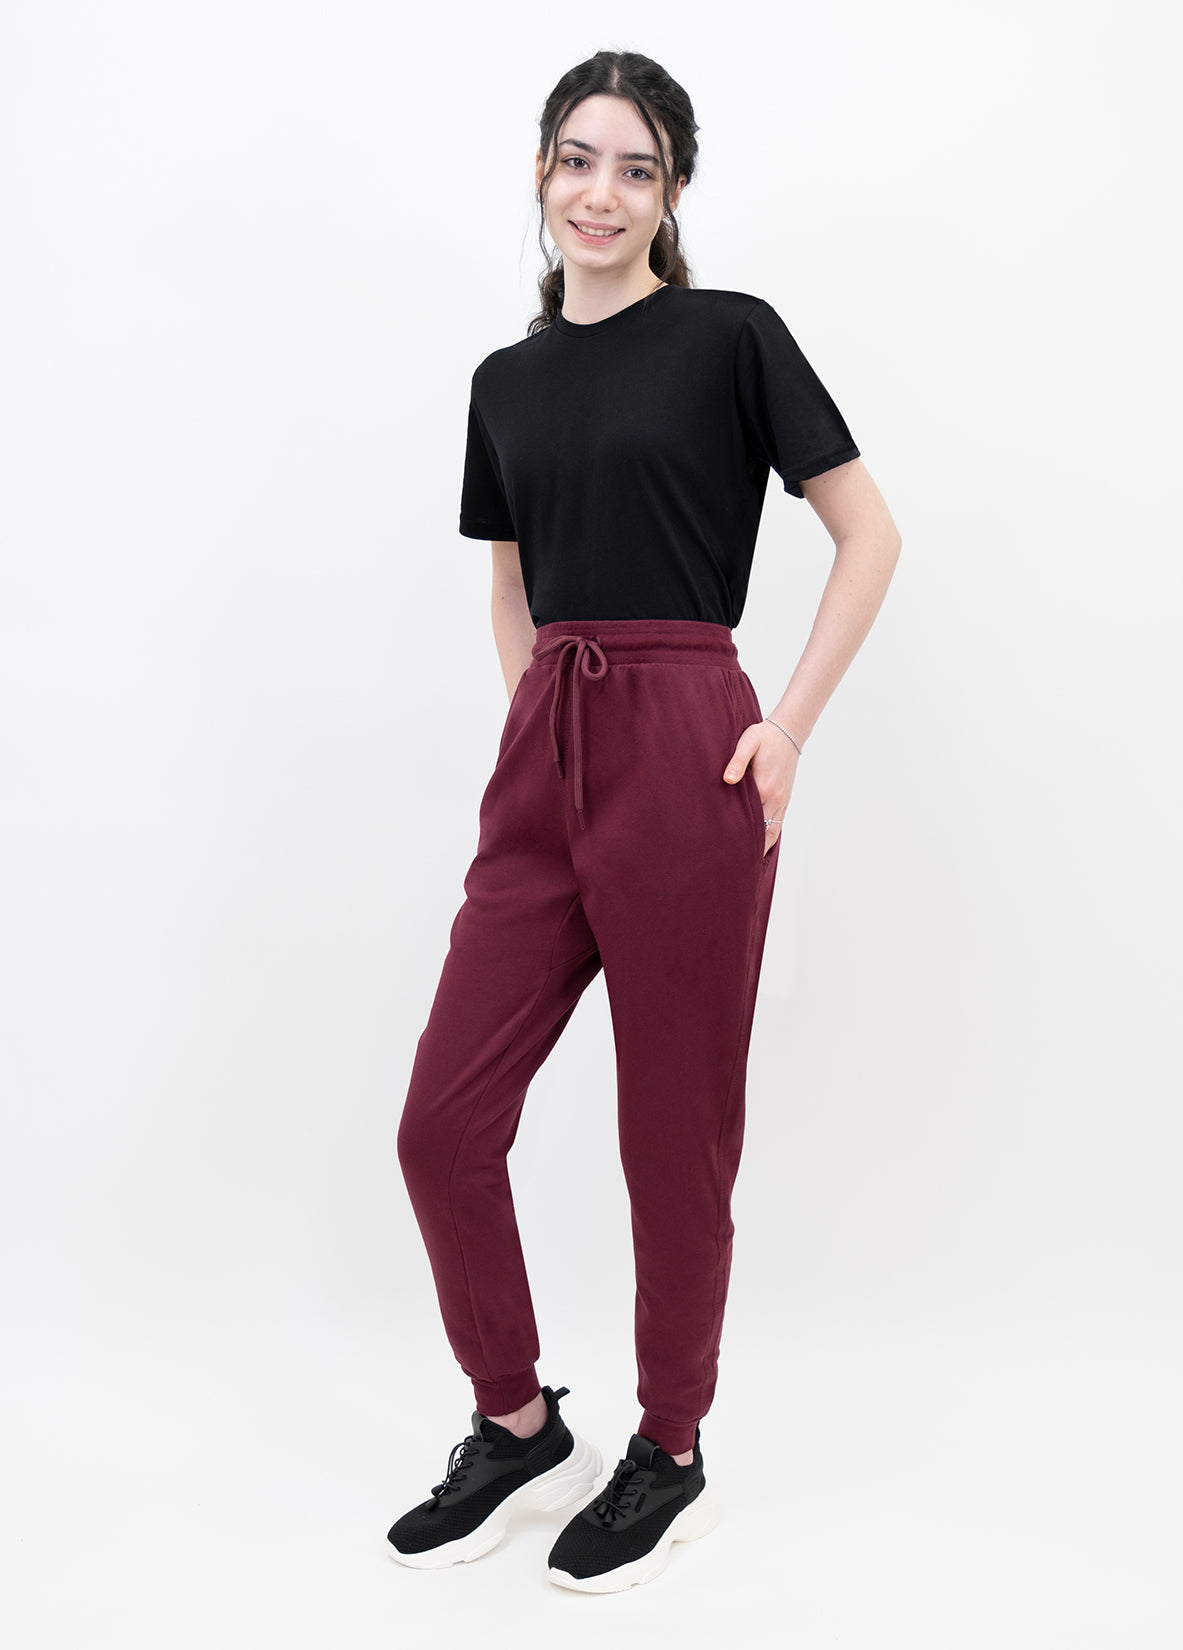 Shambhala Women's Mid Rise Live-In Comfort Fitted Jogger Pants